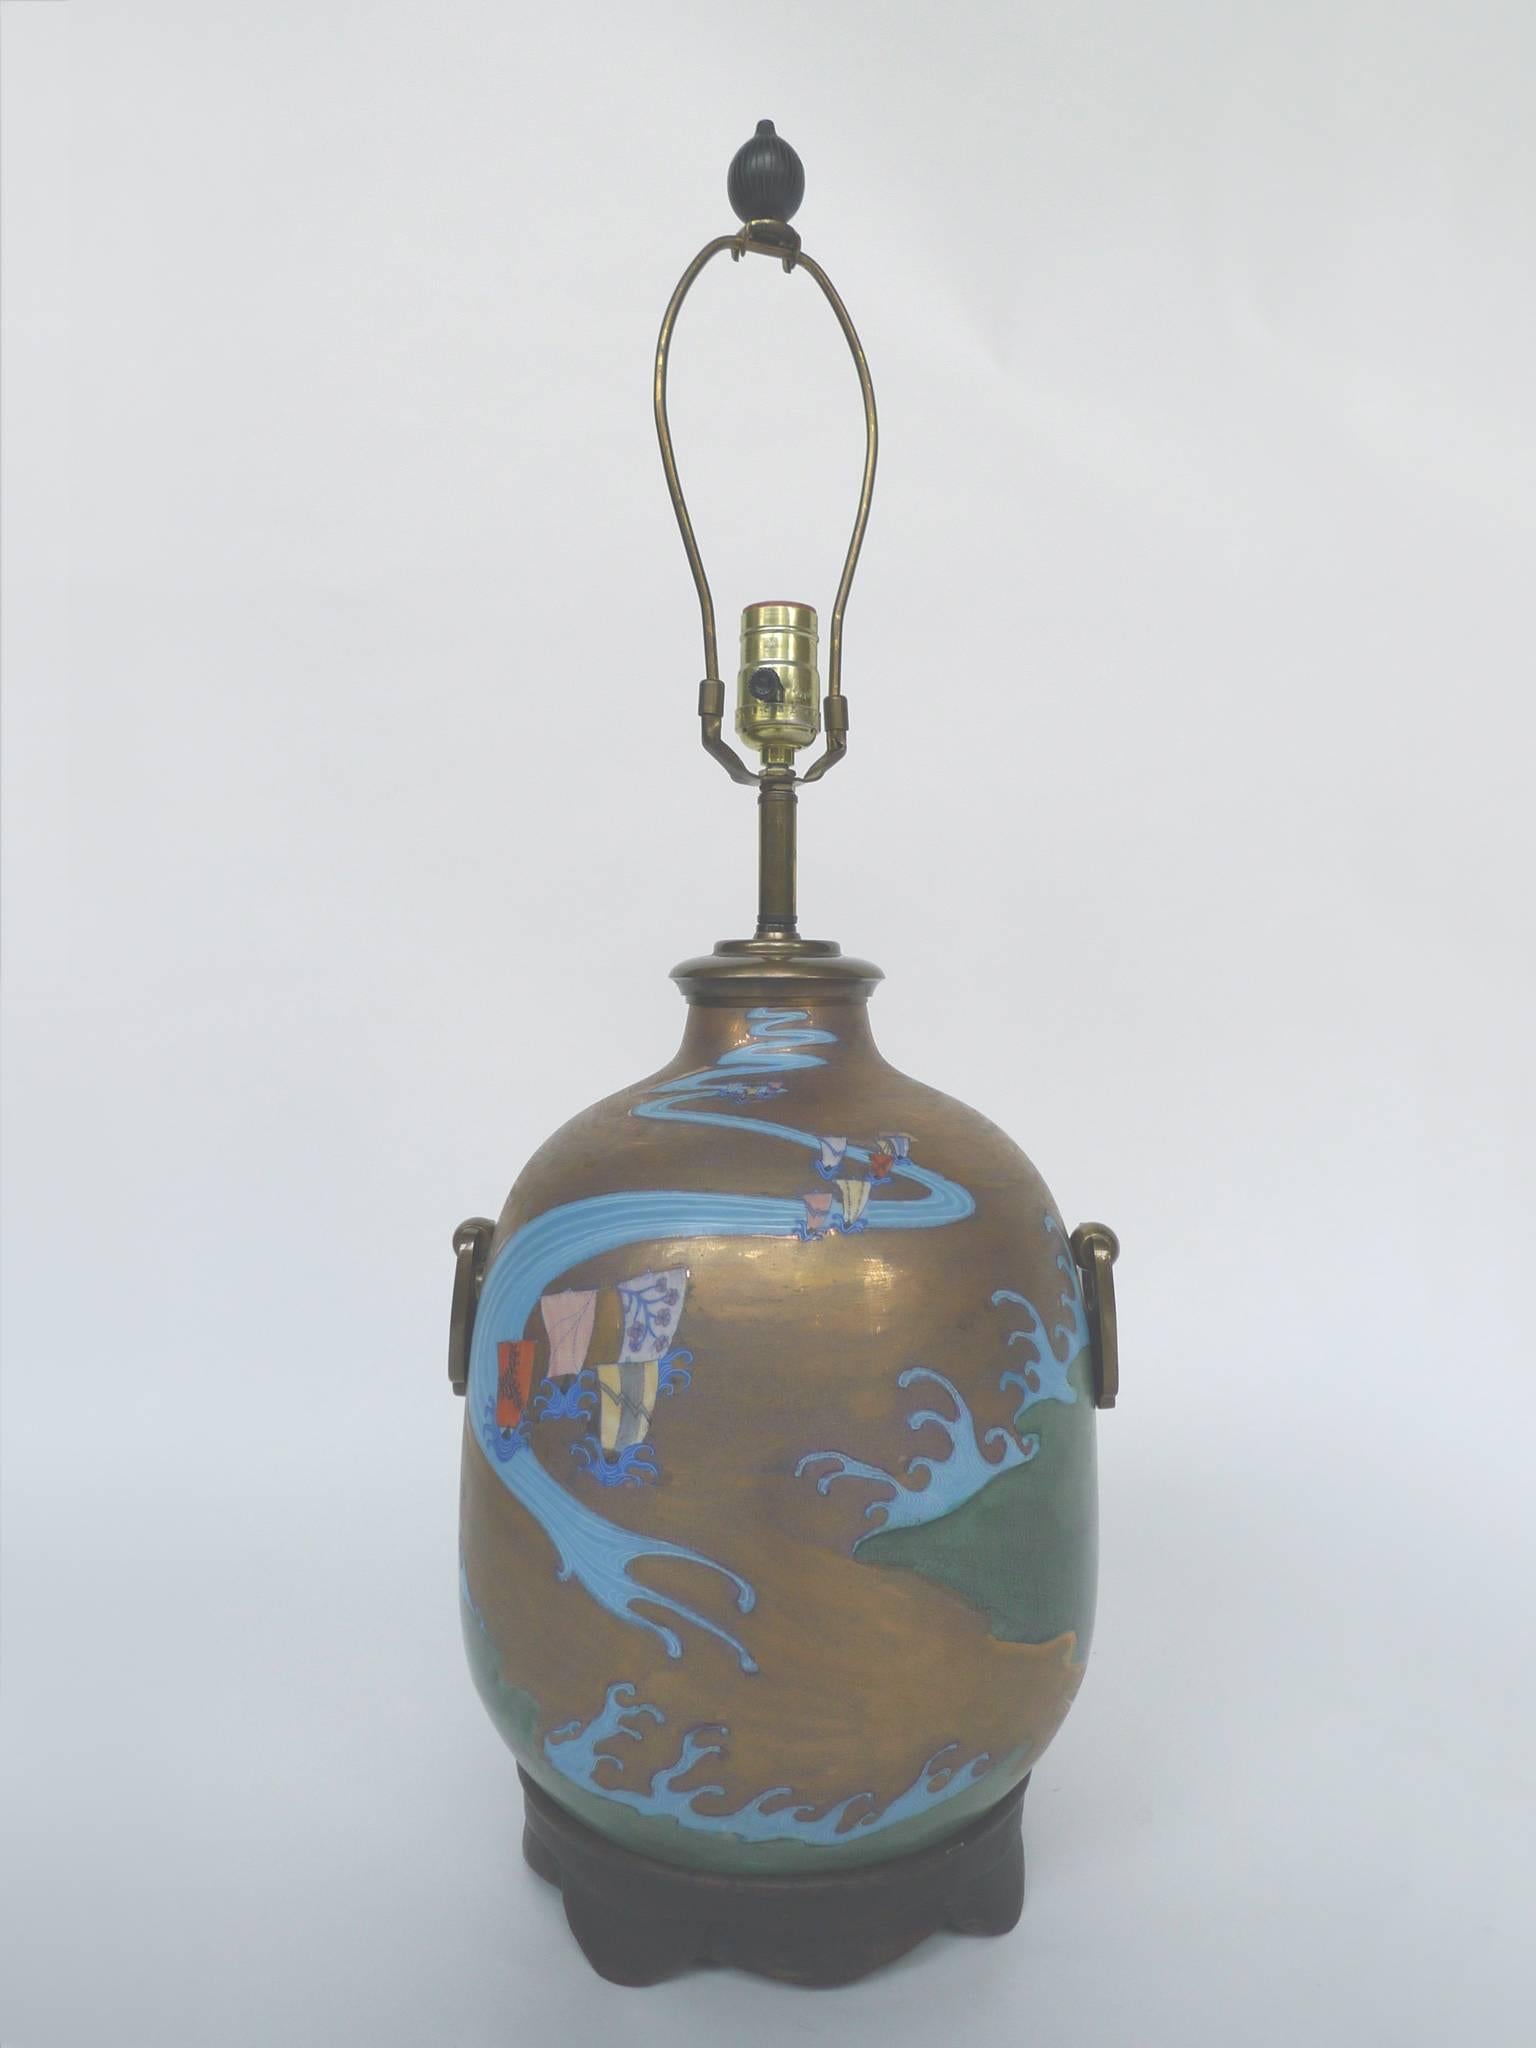 20th Century Asian Modern Enamel-Decorated Brass Table Lamp